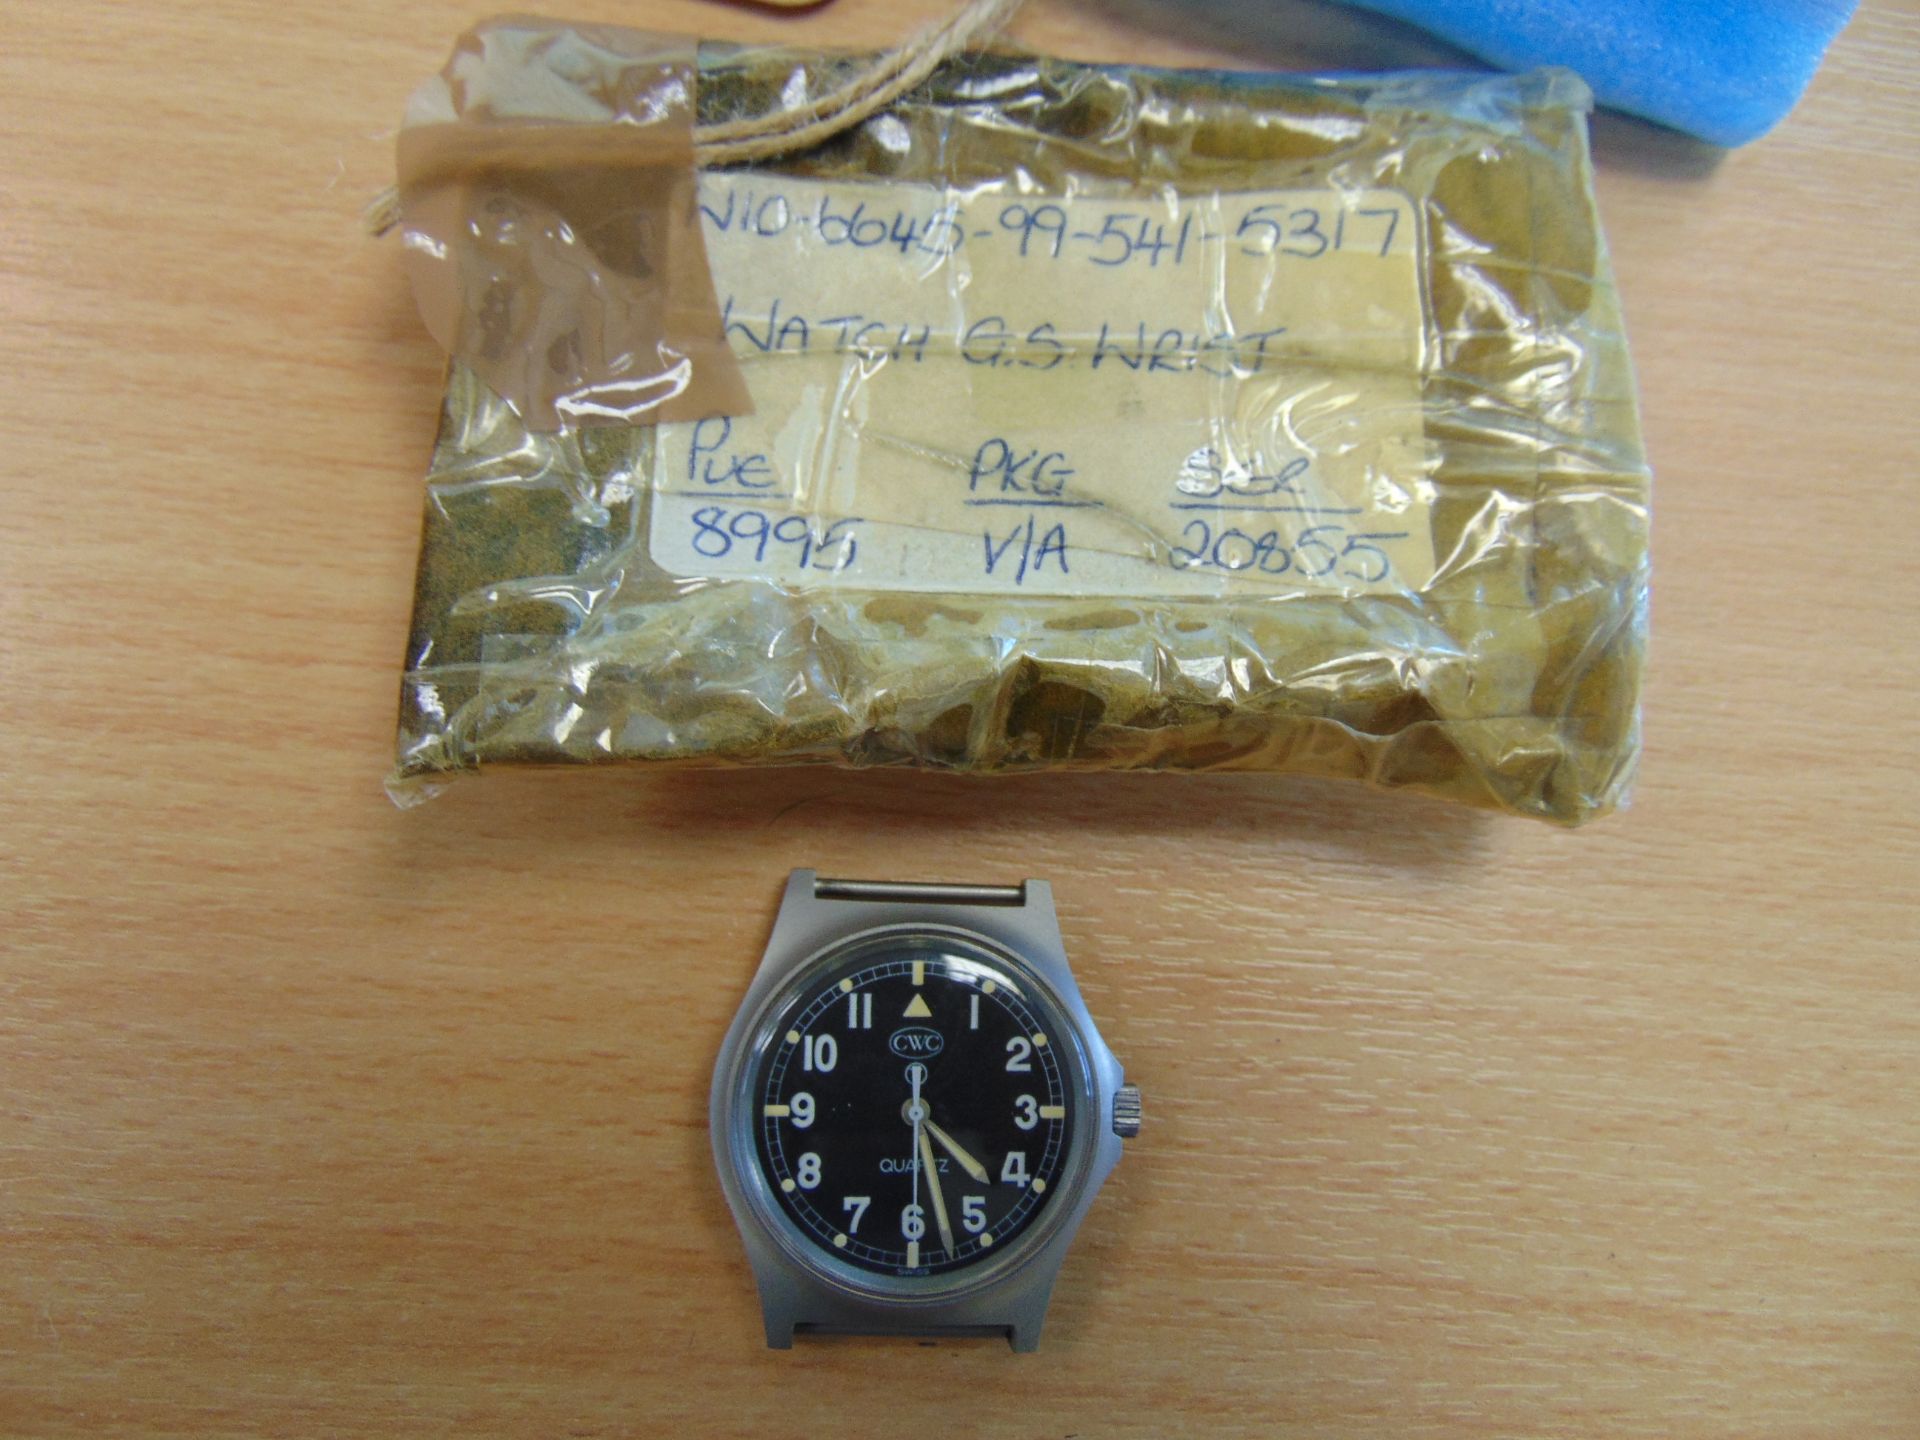 V Rare Unissued CWC (Cabot Watch Co Switzerland) British Army W10 Service Watch Dated 1983 - Image 3 of 6